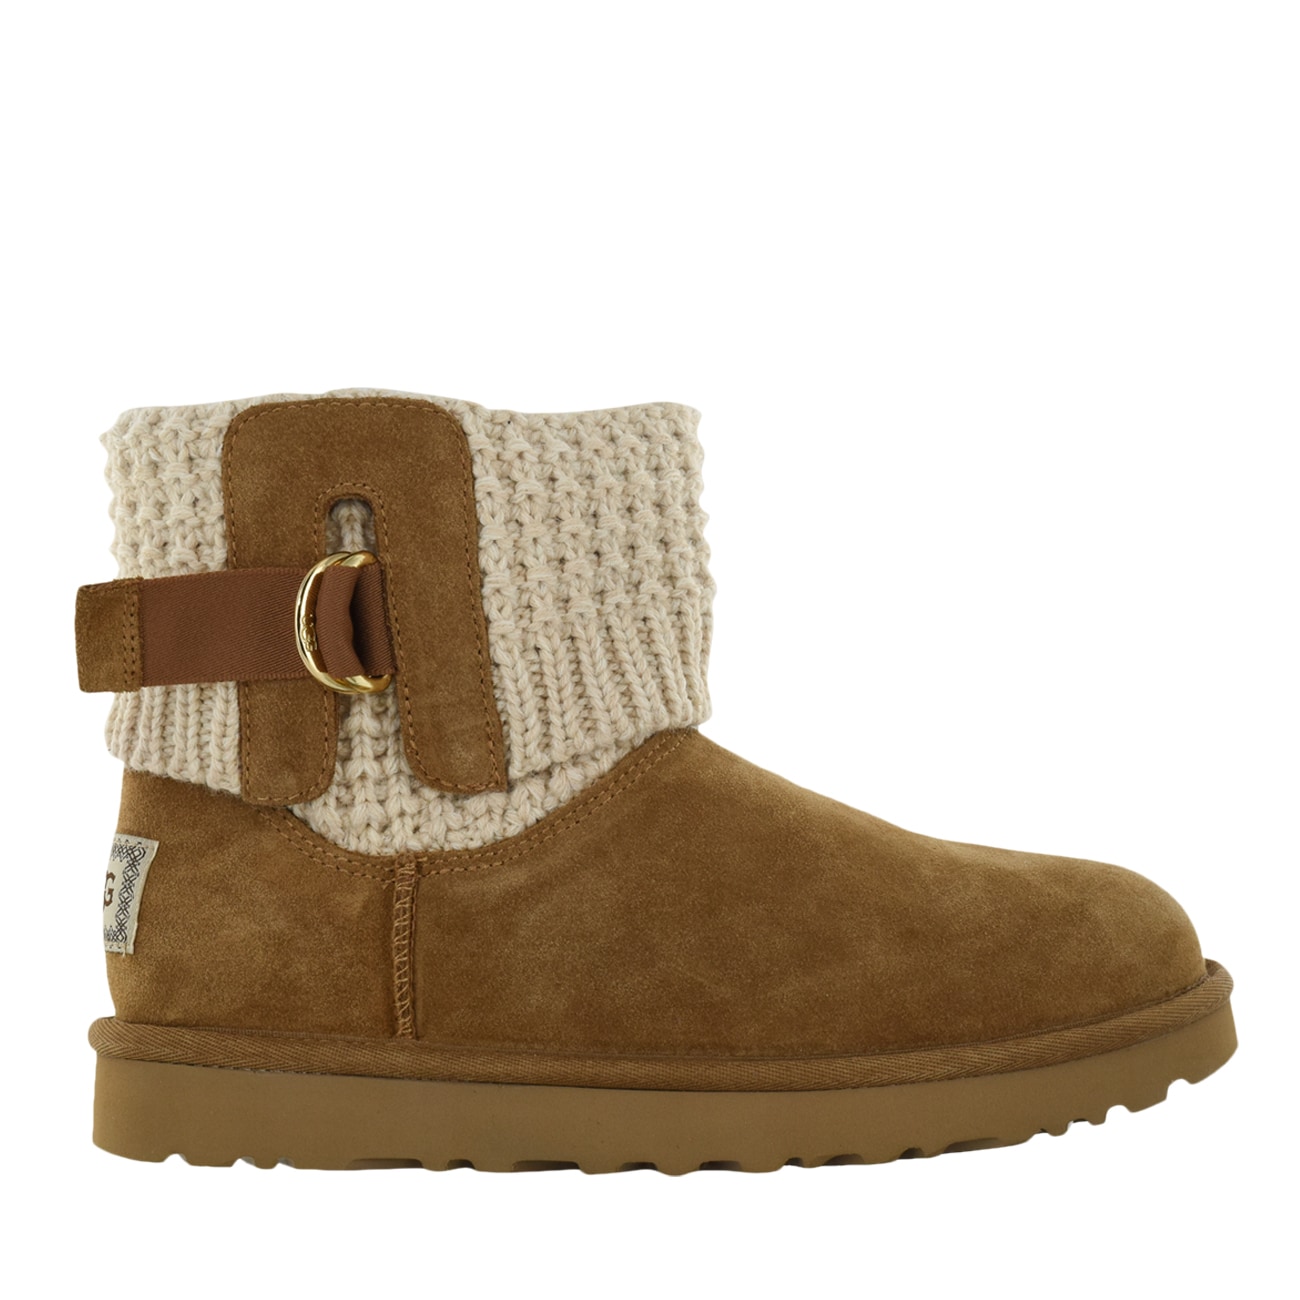 ugg boots retailers near me